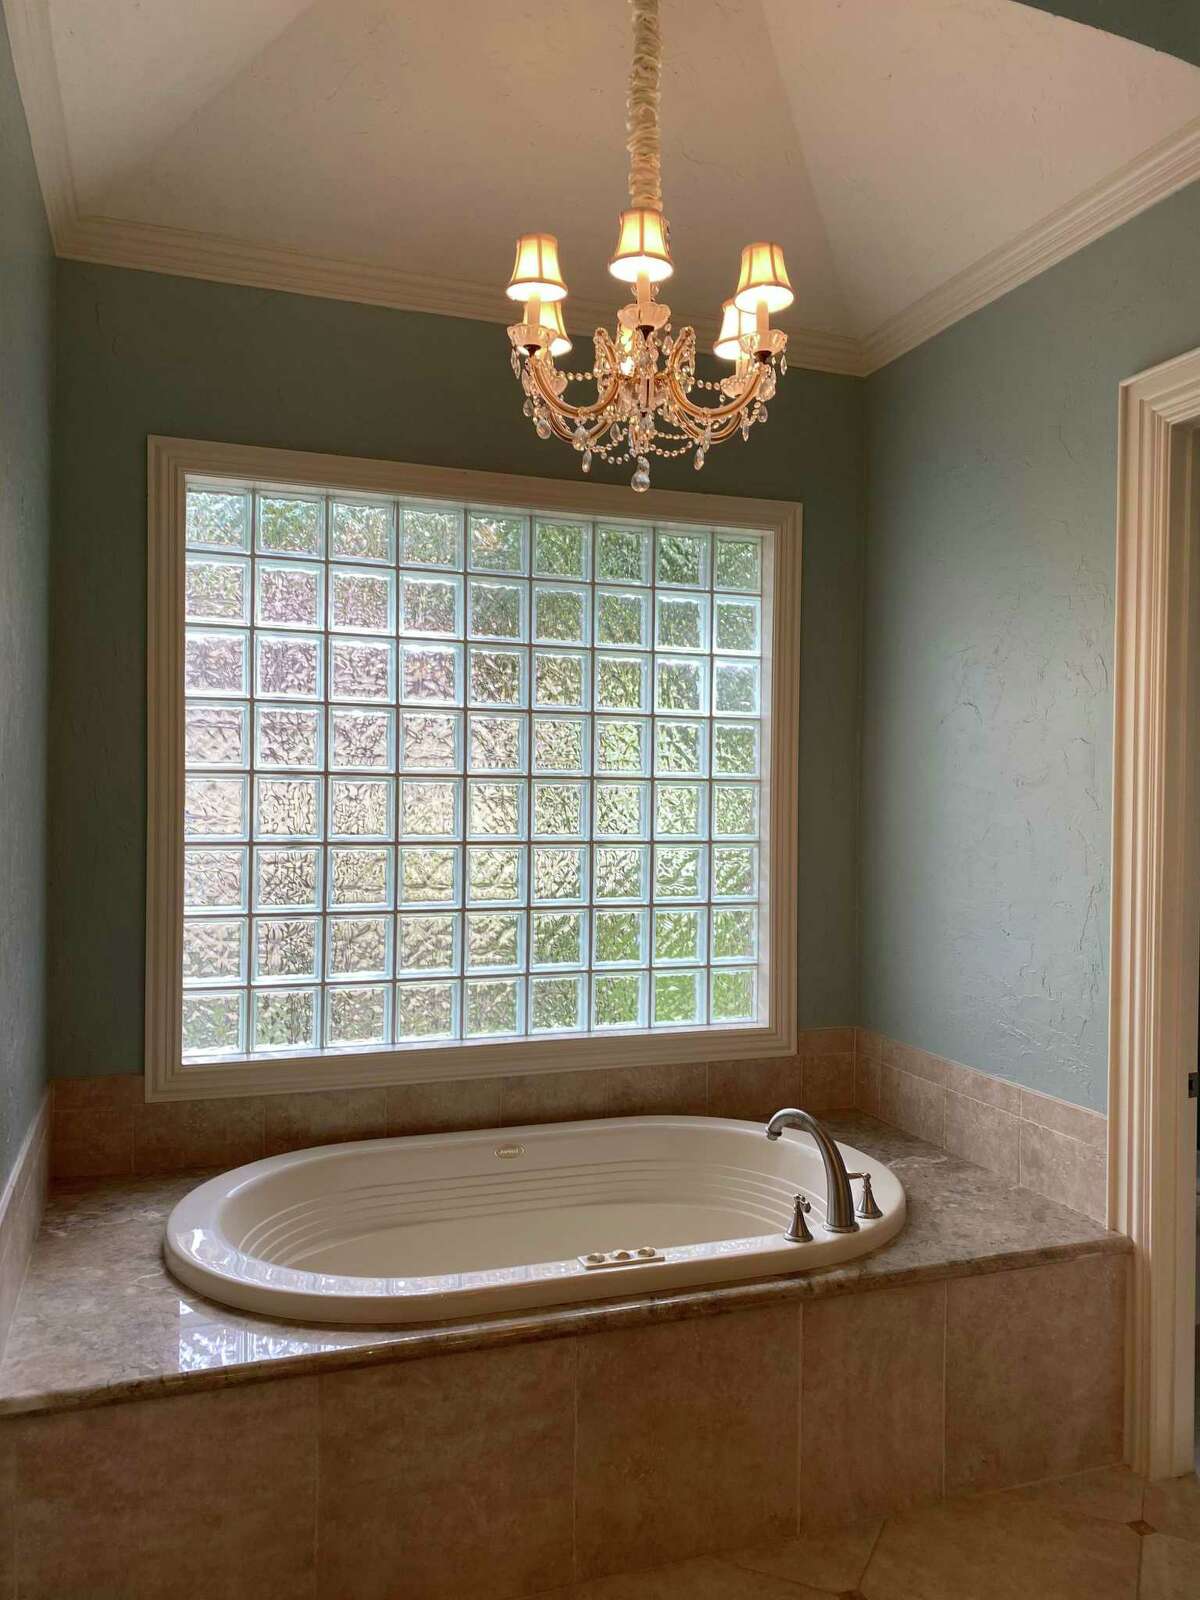 Before: The built-in bathtub dated the house to its 2003 origin. and the glass-block window was never a good idea.